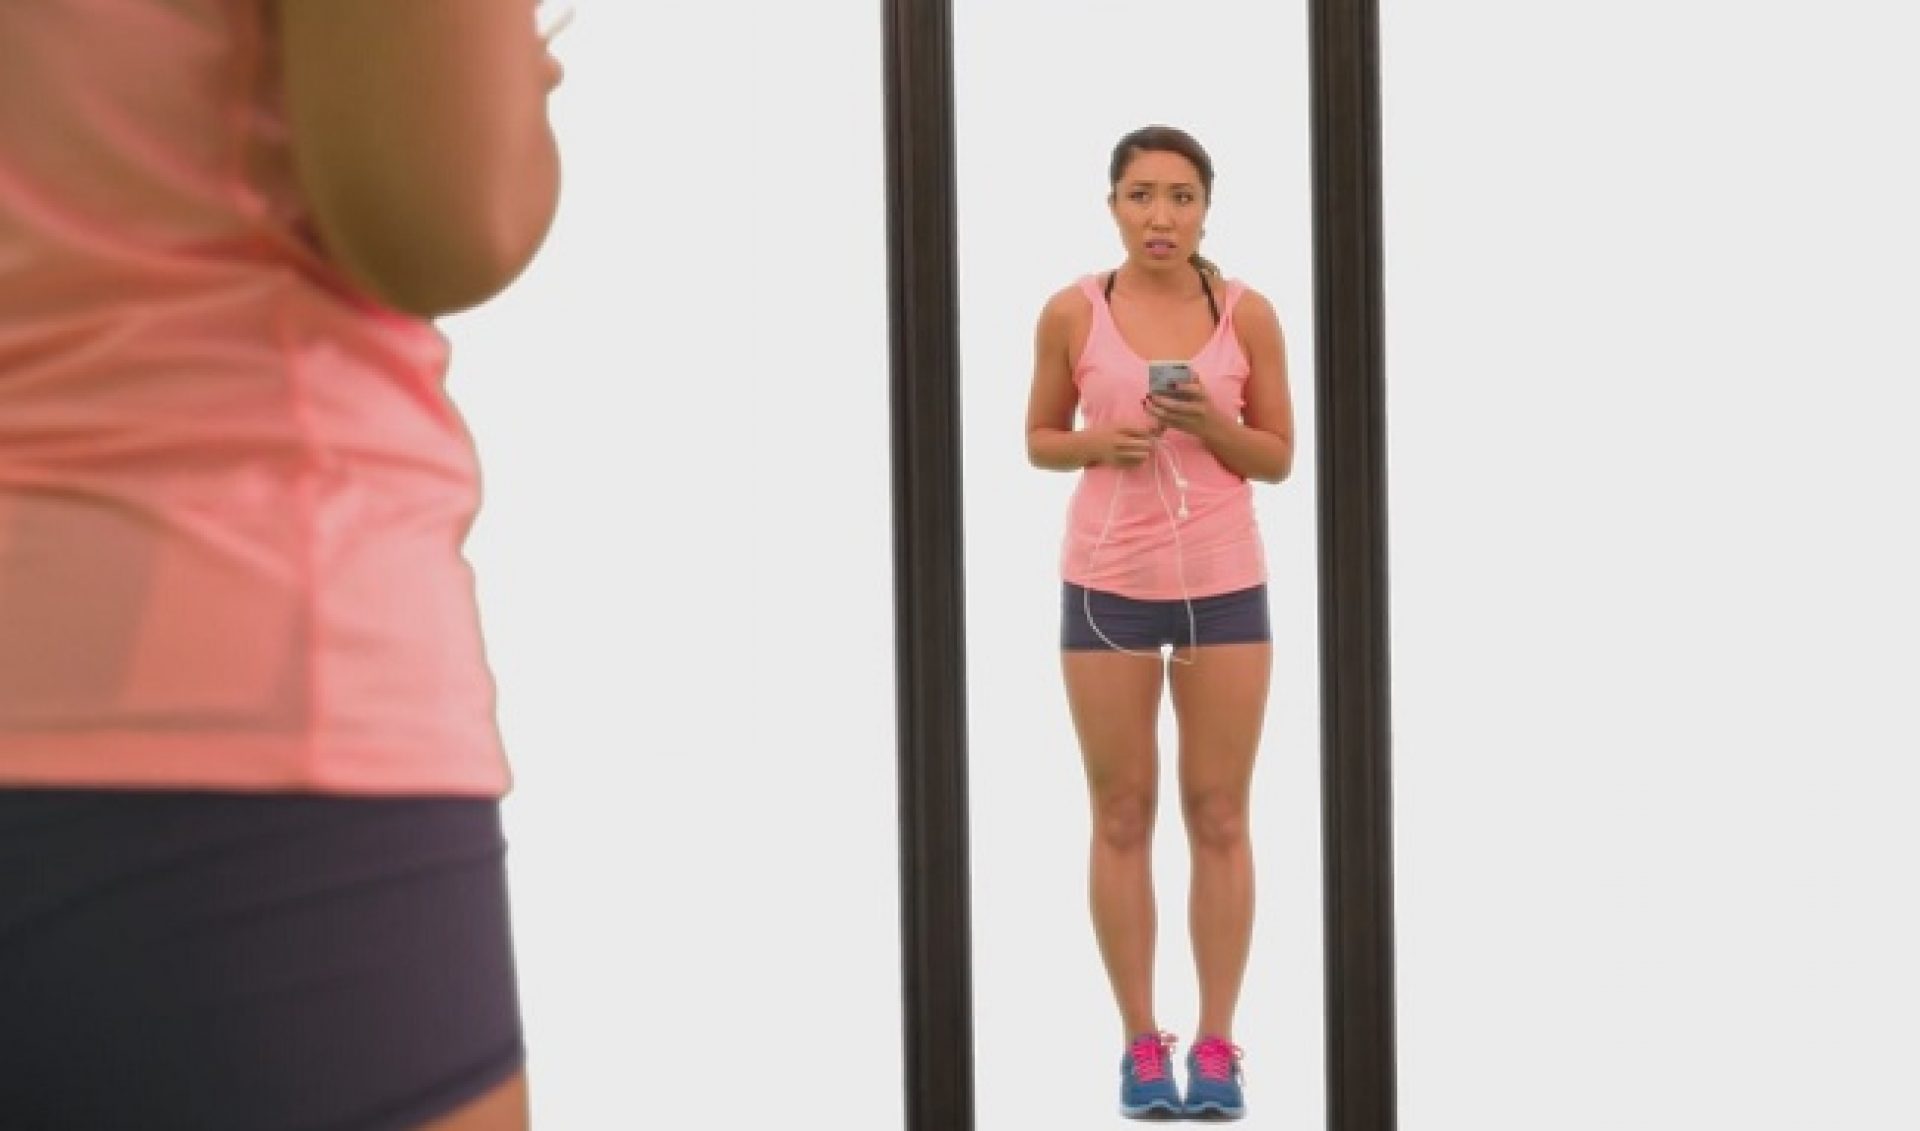 YouTube Fitness Star Cassey Ho Responds To Body Shaming With Candid, Powerful Video